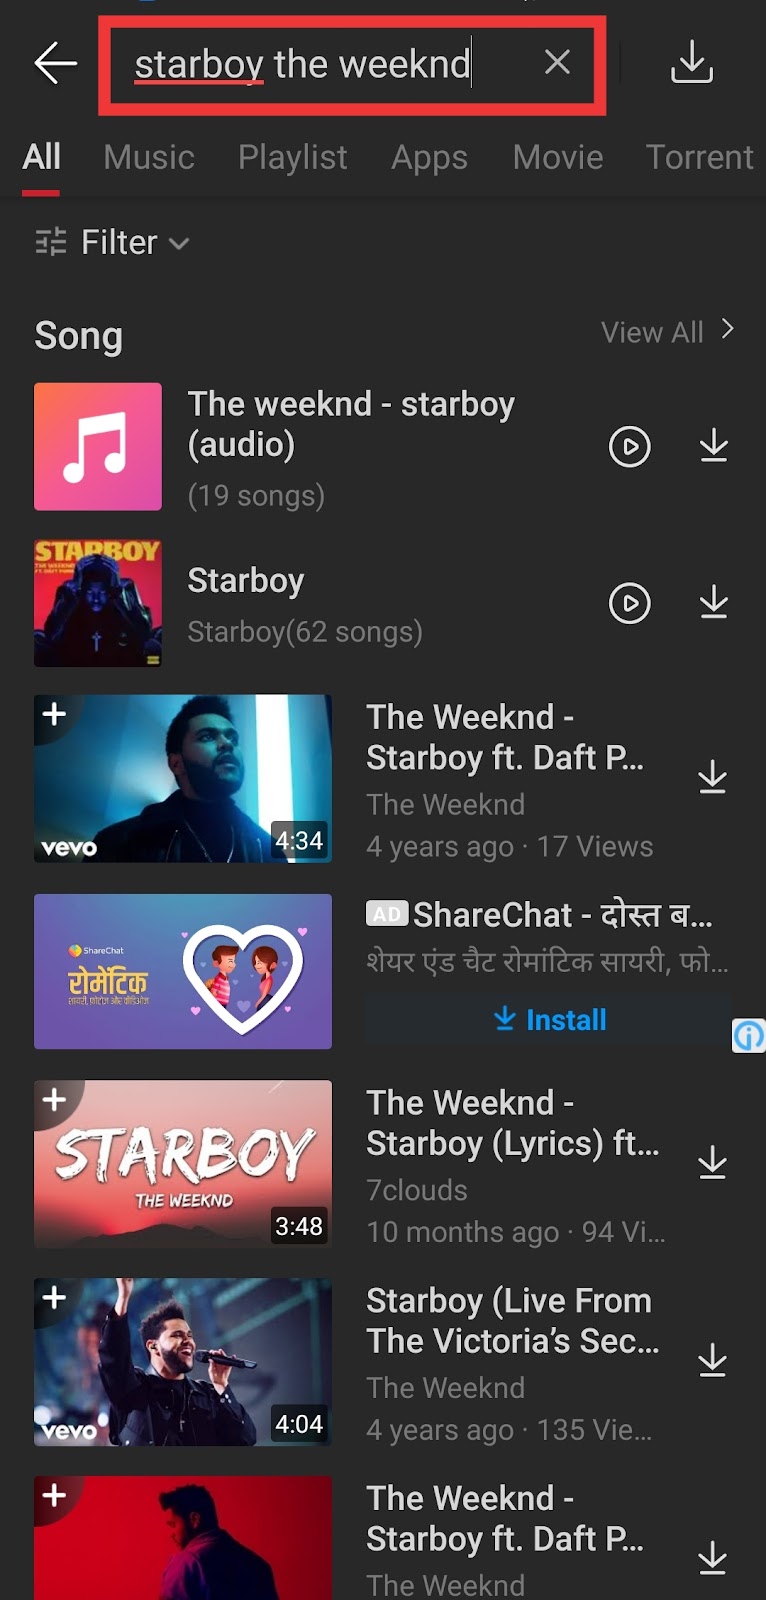 Best of The Weeknd's Songs Download in MP3 & MP4 - VidMate